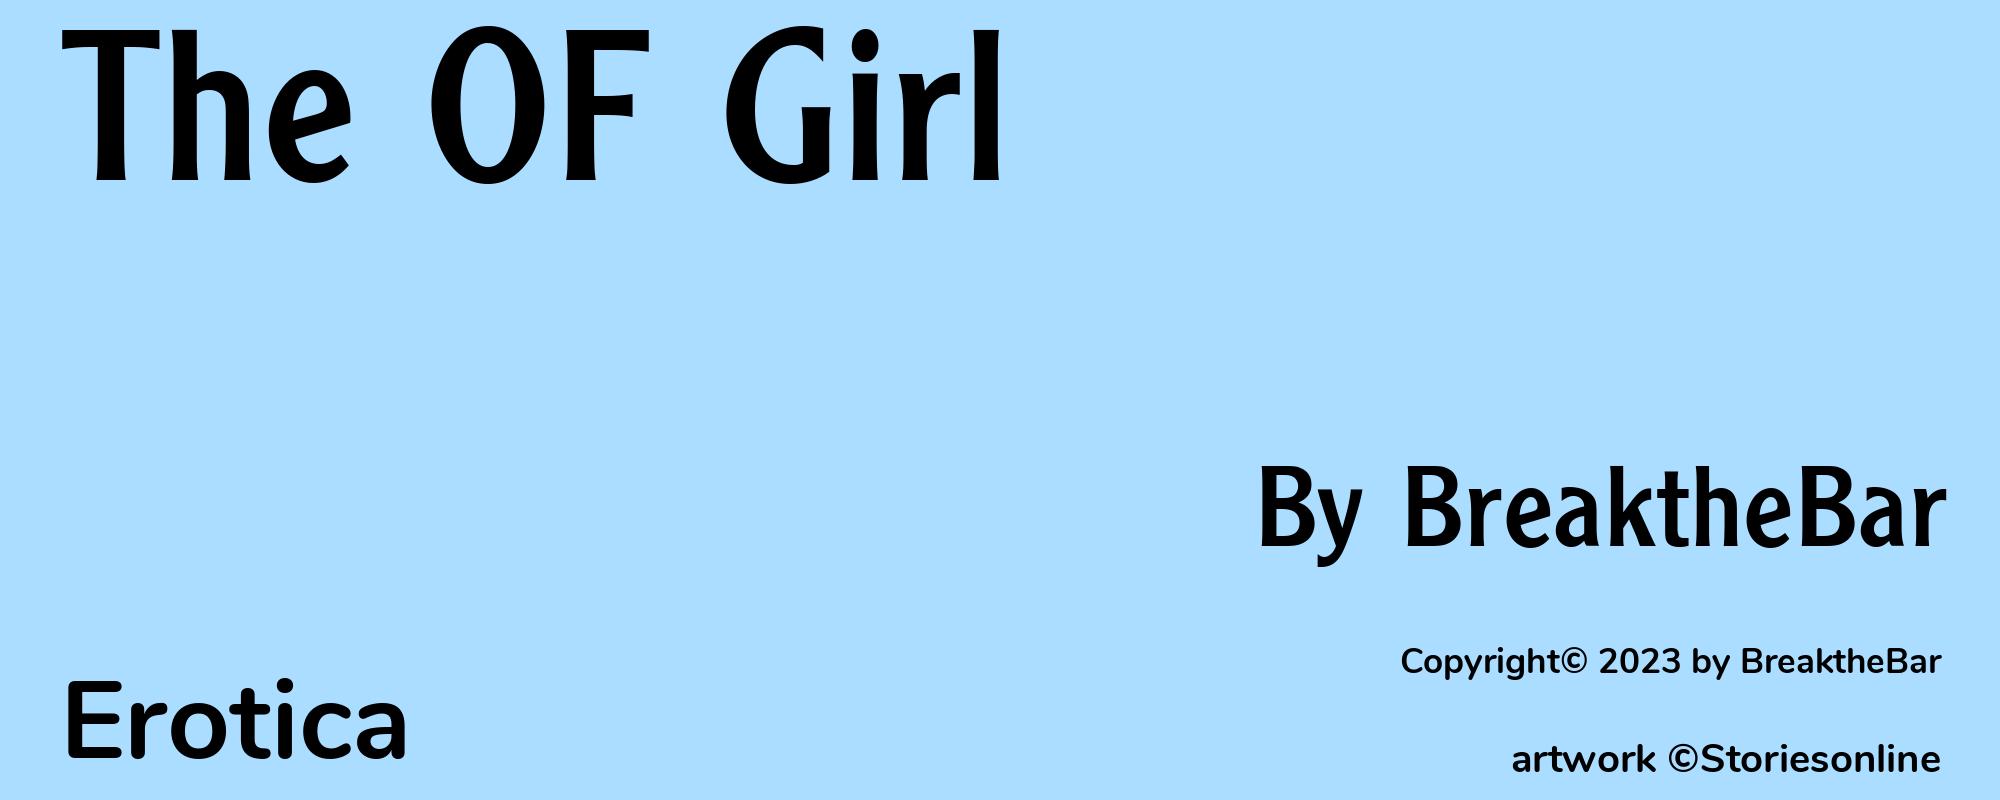 The OF Girl - Cover